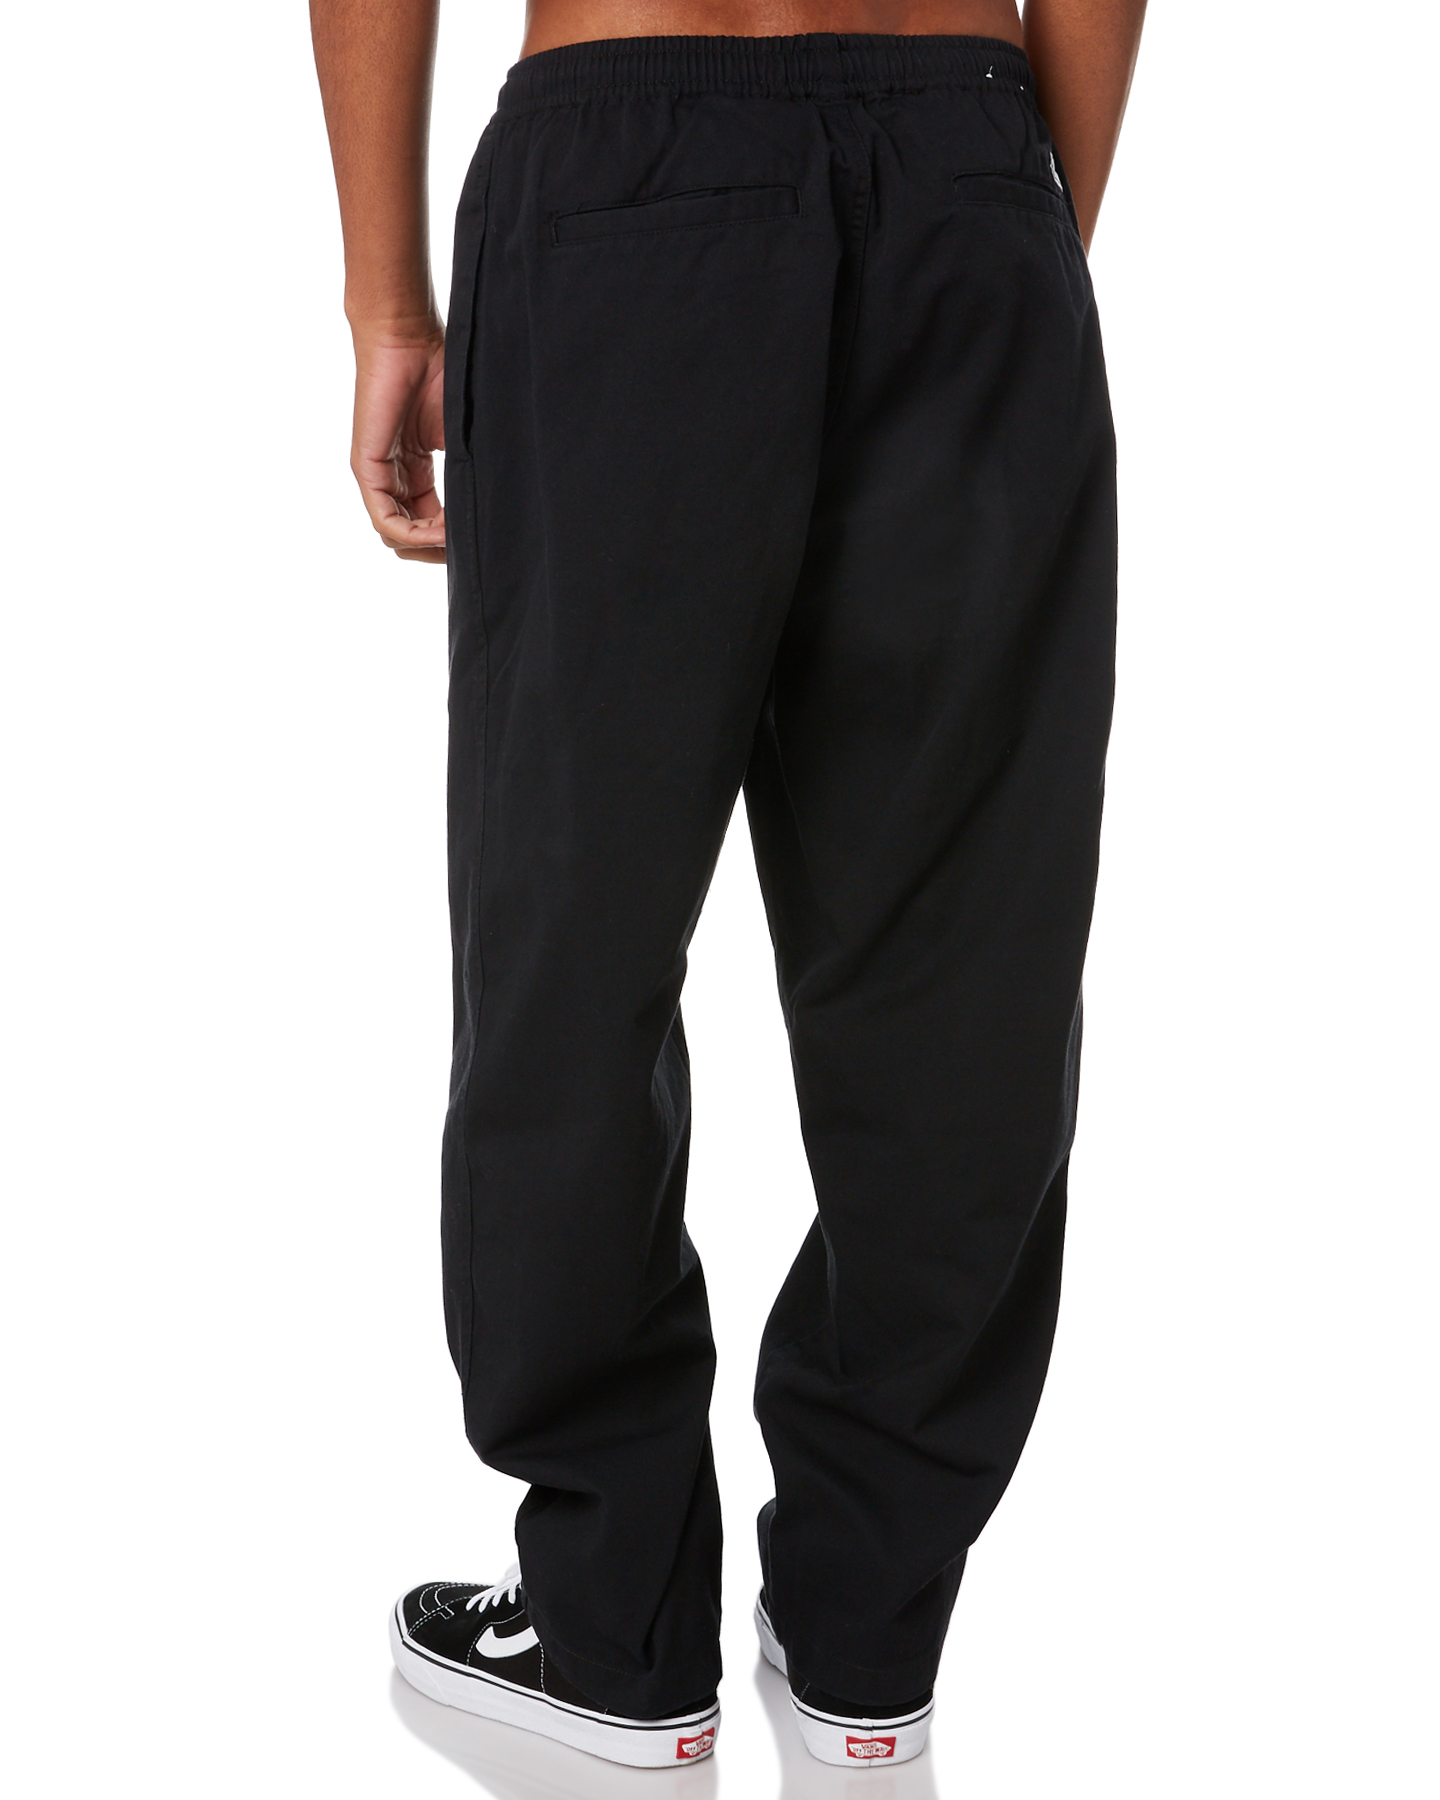 Obey Easy Twill Mens Pant - Black | SurfStitch